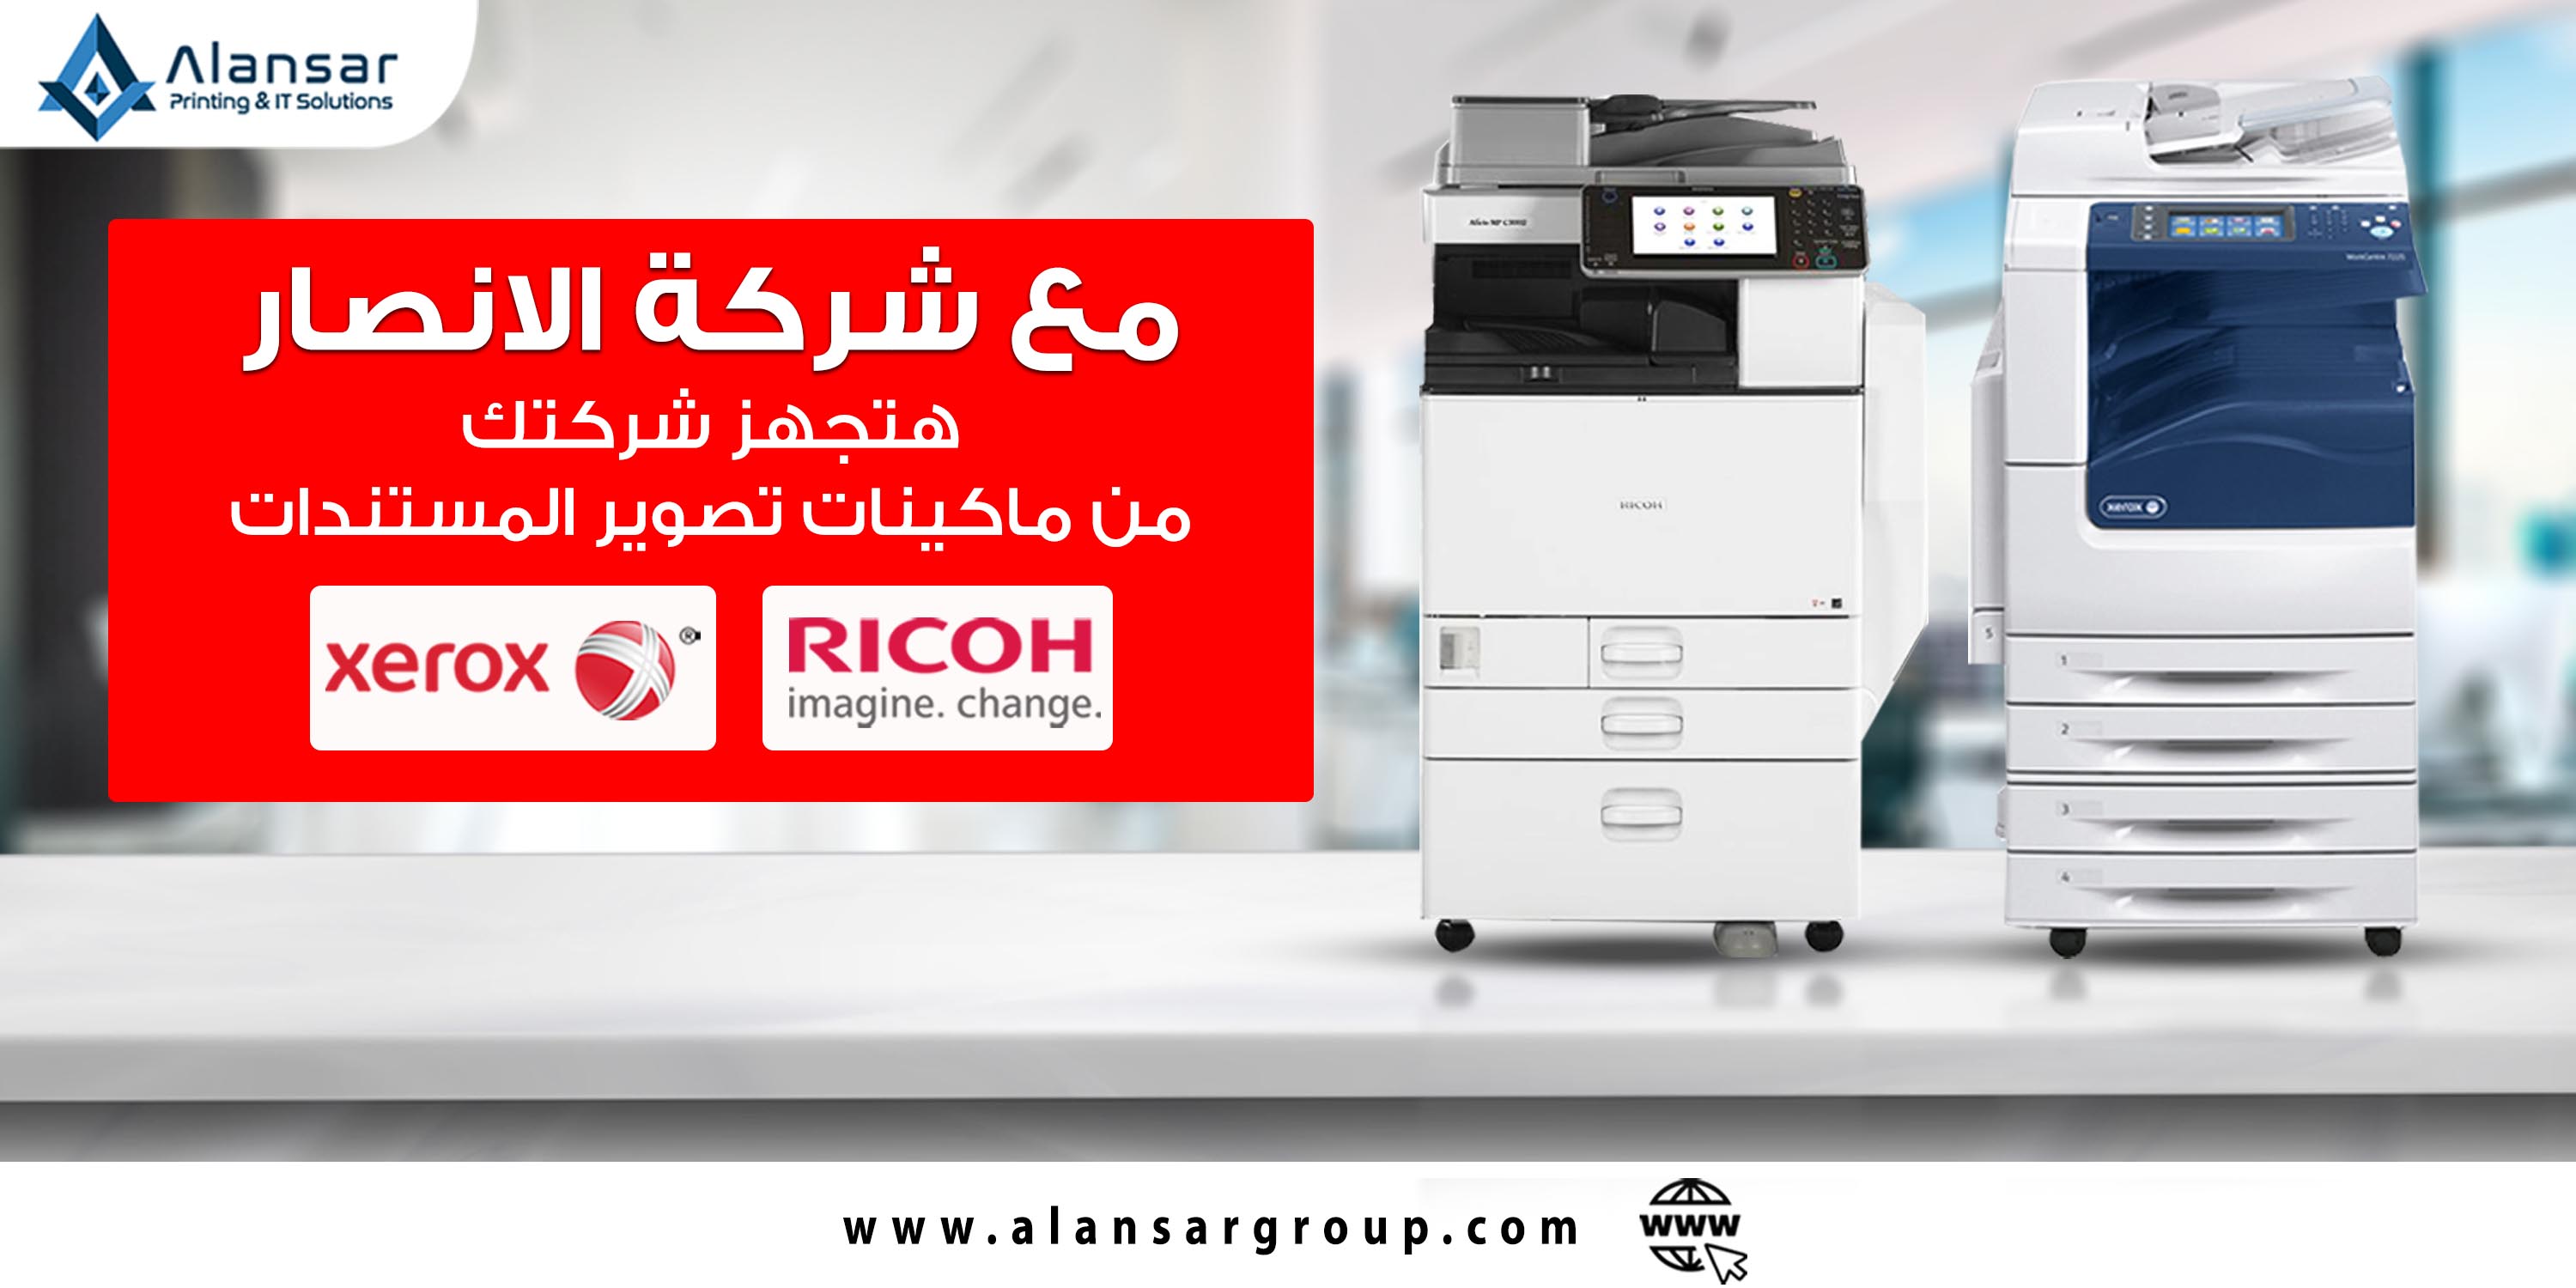 Photocopiers rule develop your company